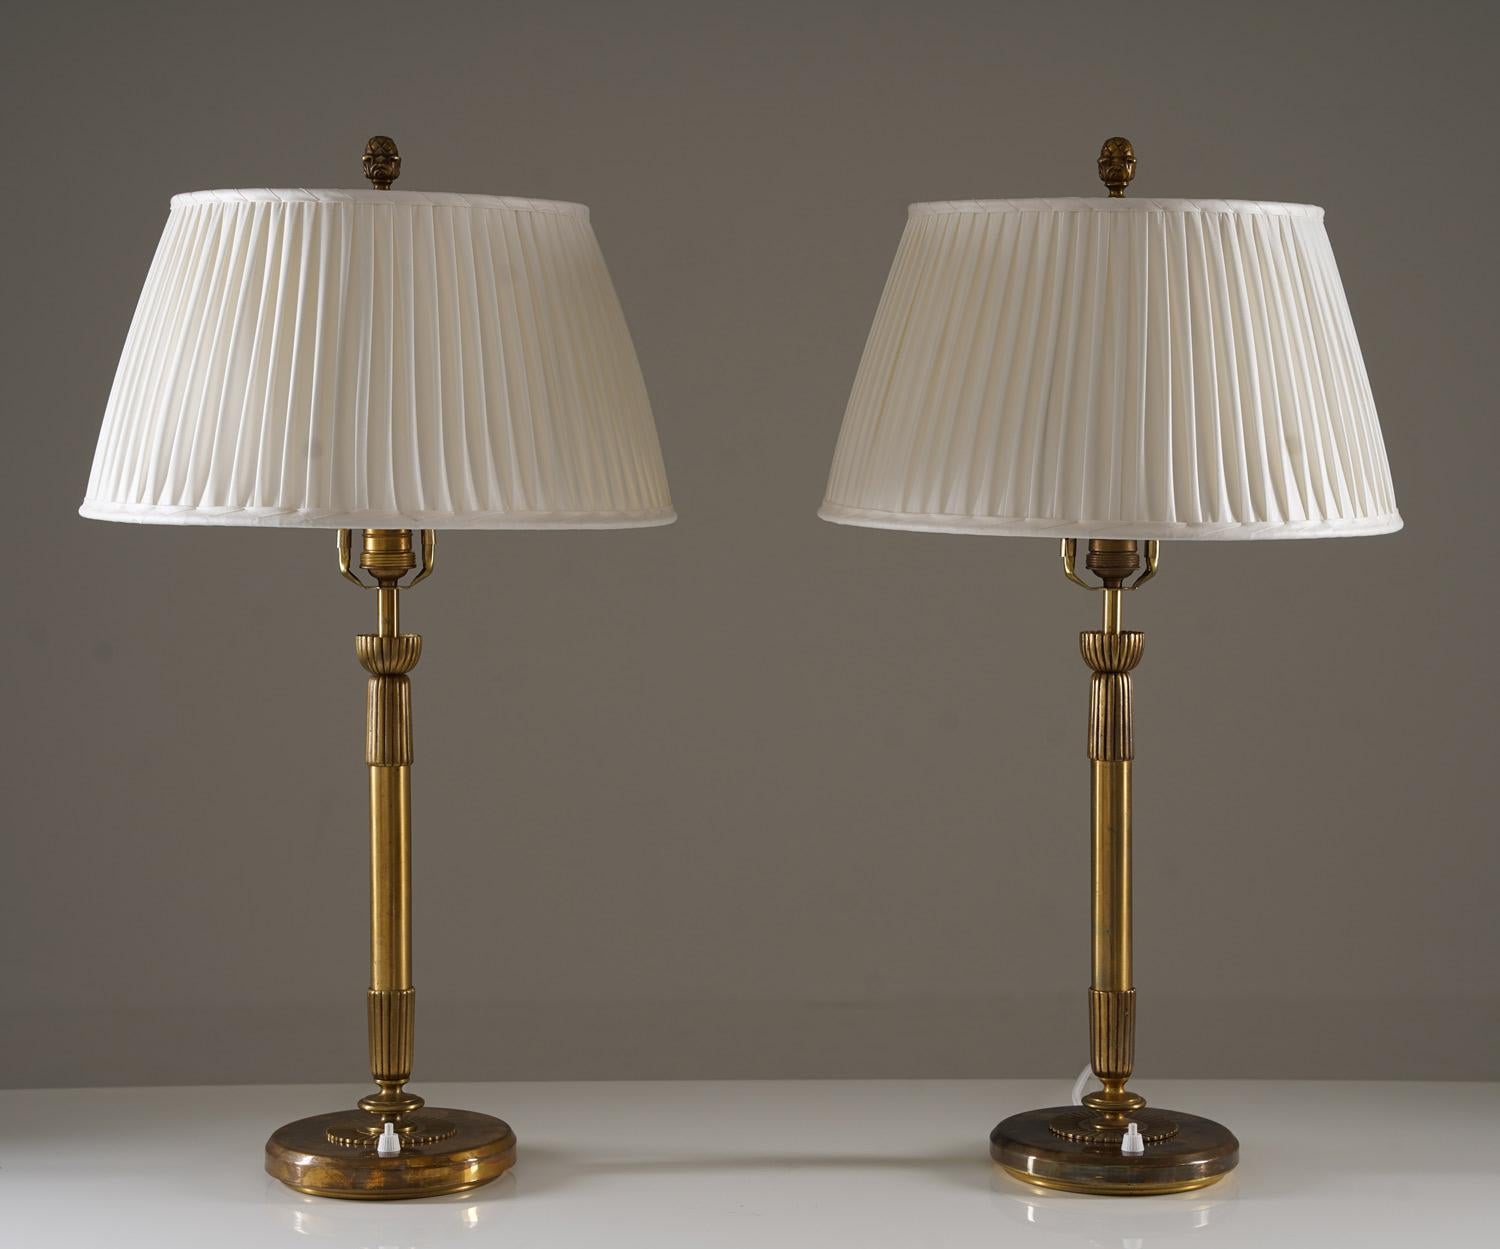 A pair of majestic table lamps manufactured by Einar Bäckström, Sweden, 1950s. 
The lamps are made of brass and have new hand-pleated chintz shades.

Condition: Very good condition. The shades are new hand-pleated chintz fabric shade, custom made